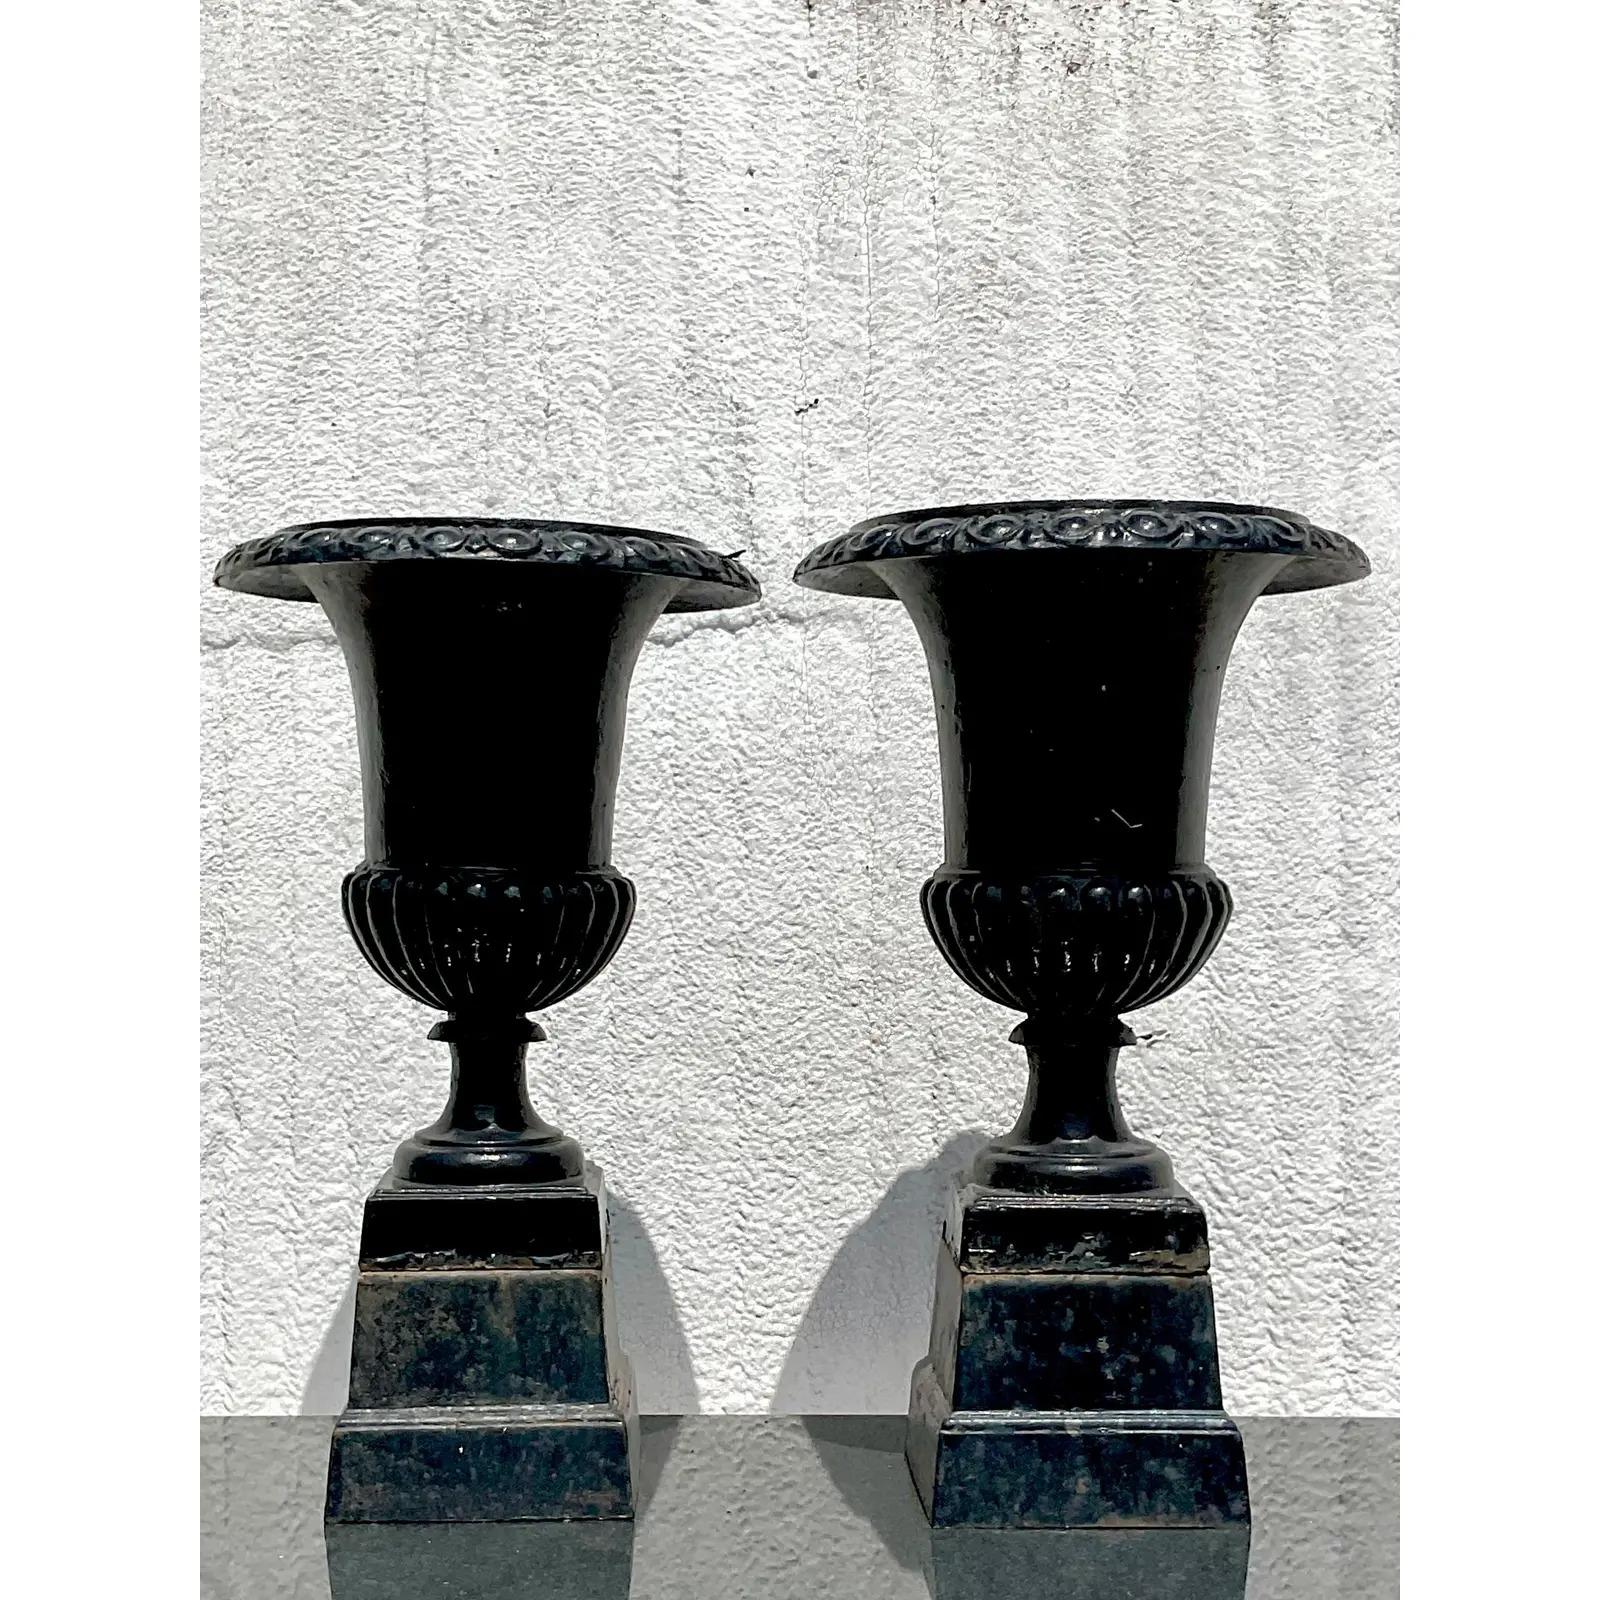 20th Century Vintage Regency Wrought Iron Urns, a Pair